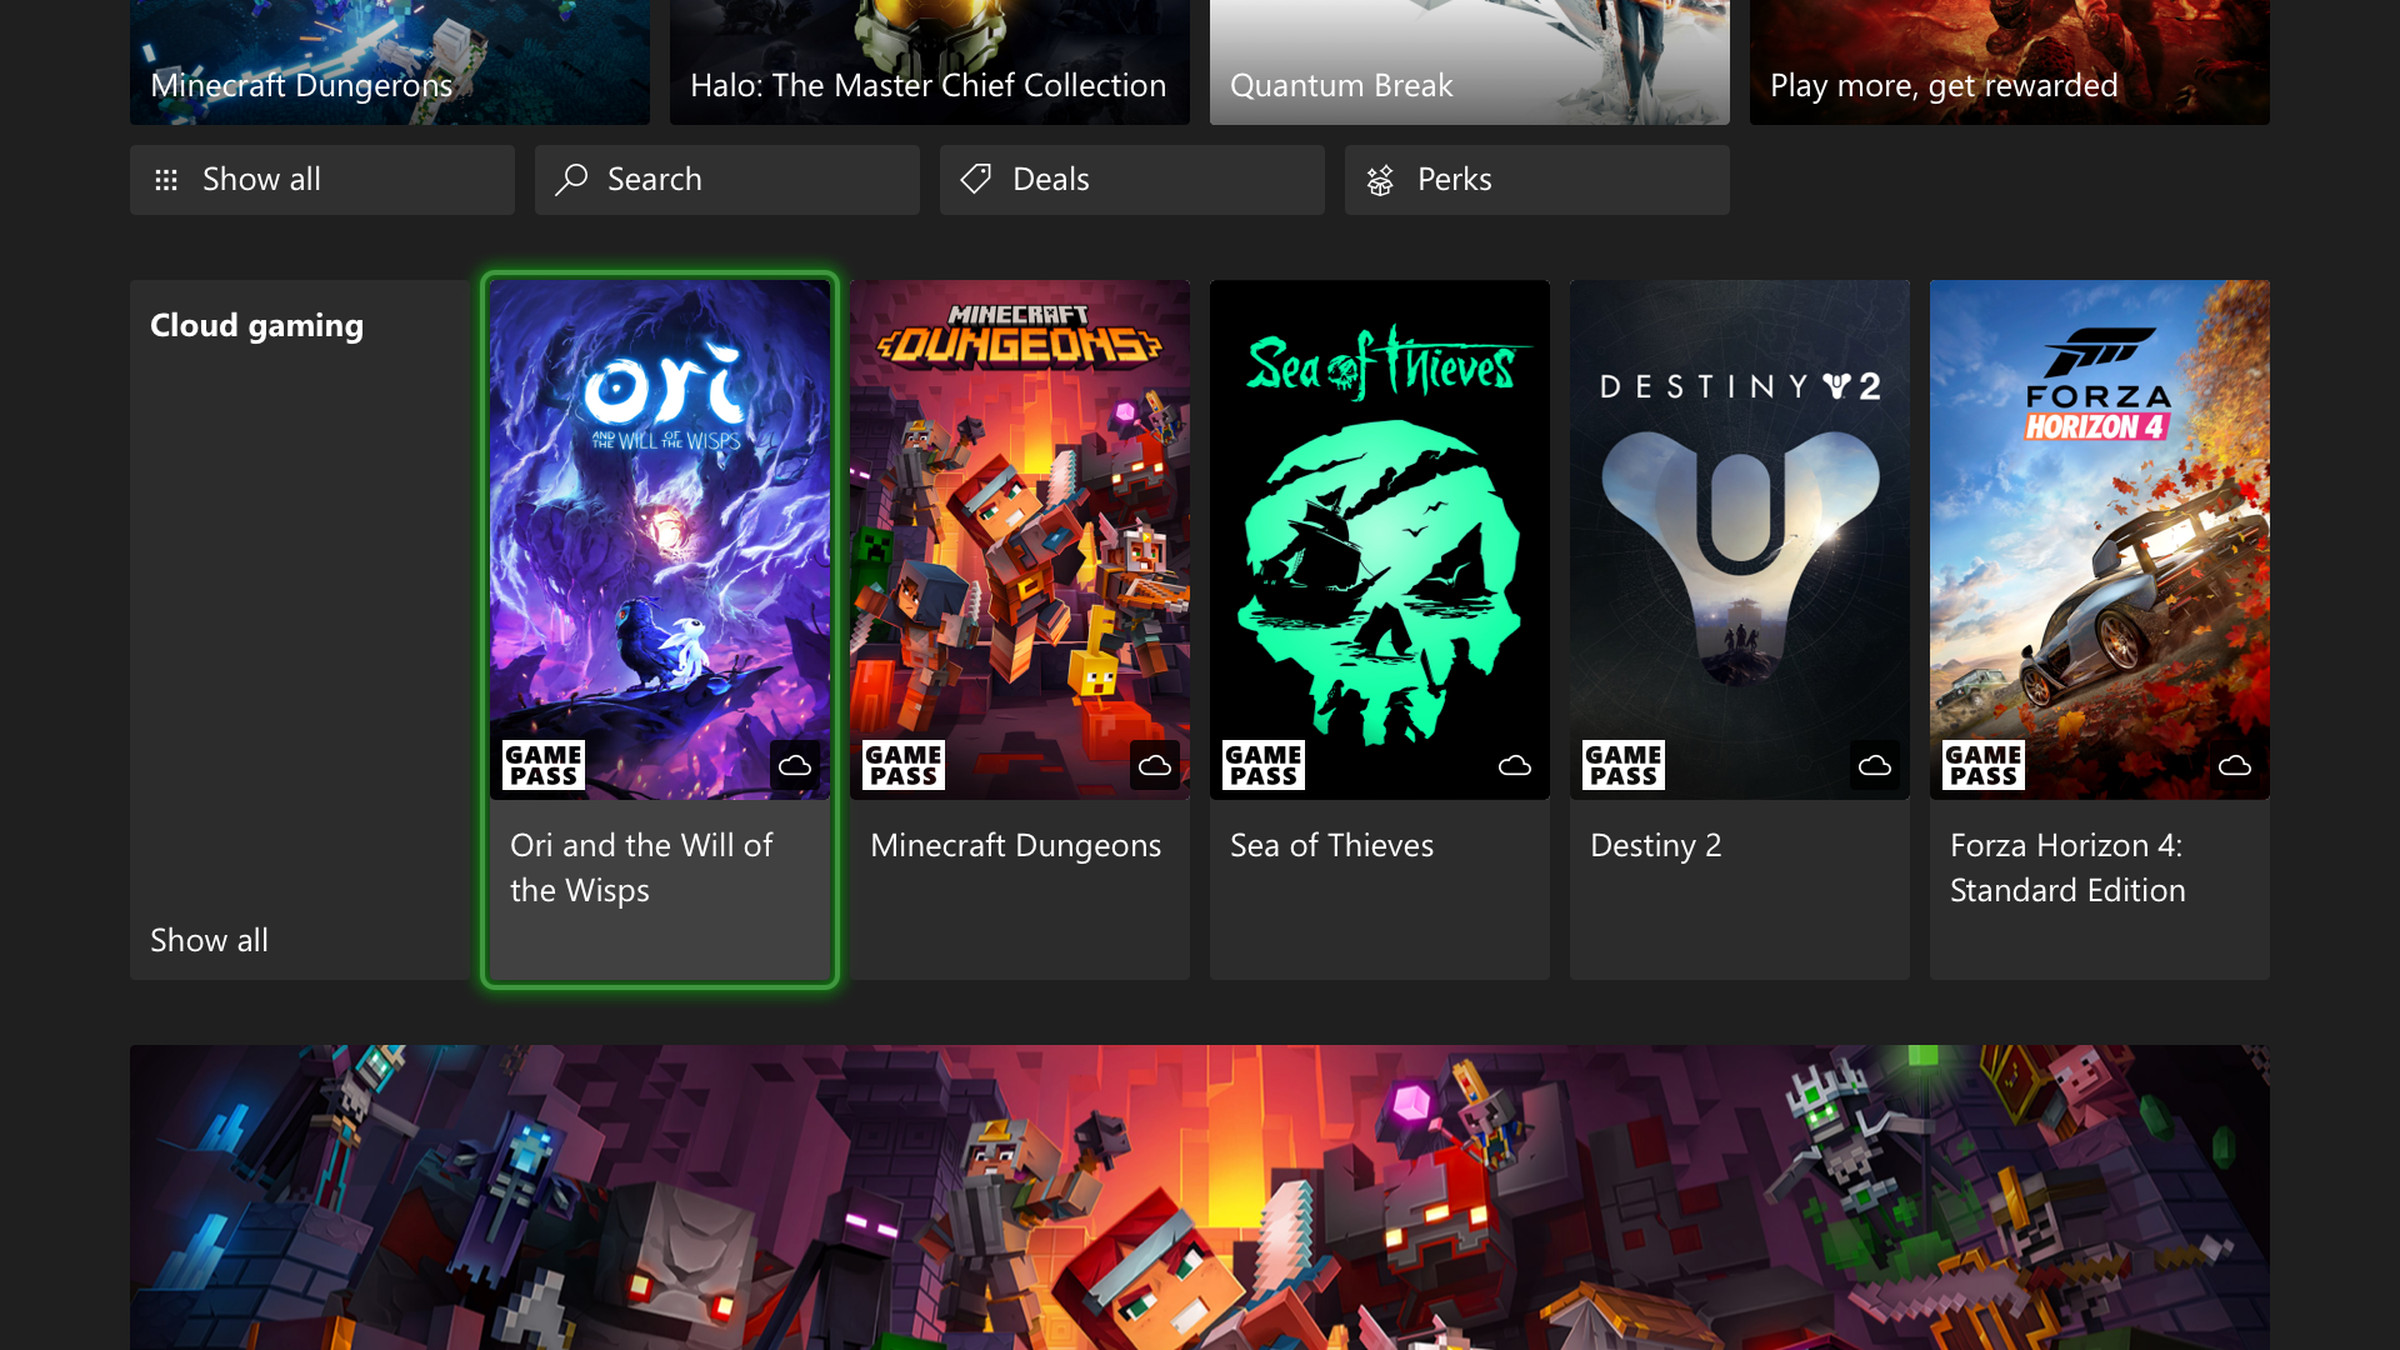 Xbox Game Pass is getting integrated into the Xbox dashboard.